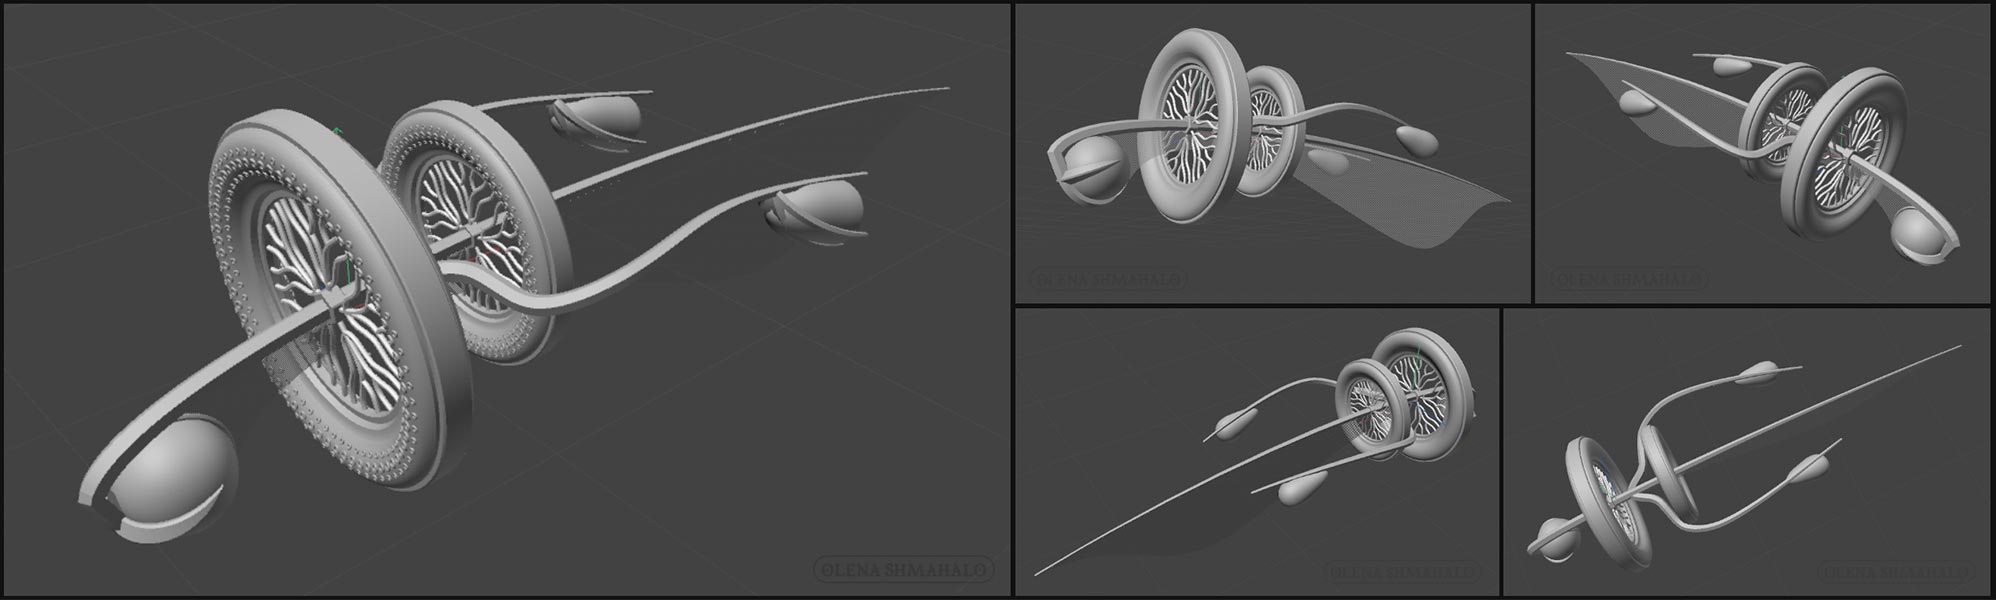 3D model of a spaceship. The ship's body is shaped like a maple seed, intersected by two large wheels that would generate artificial gravity along their interior. 3D model by Olena Shmahalo.